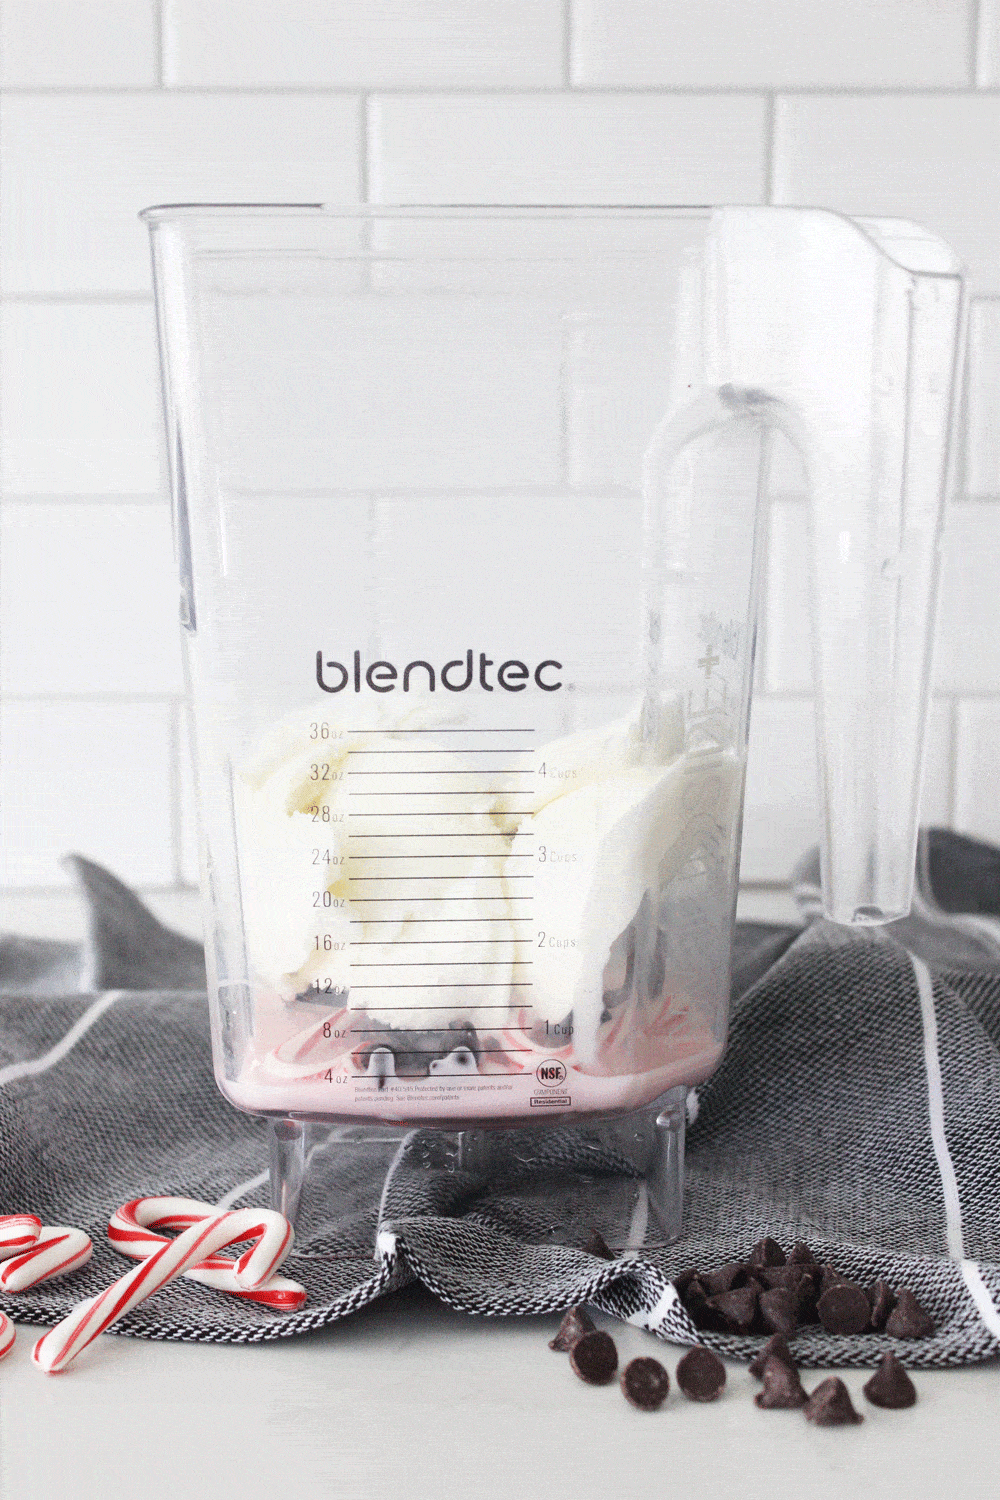 chick fil a peppermint shake ingredients in the blendtec